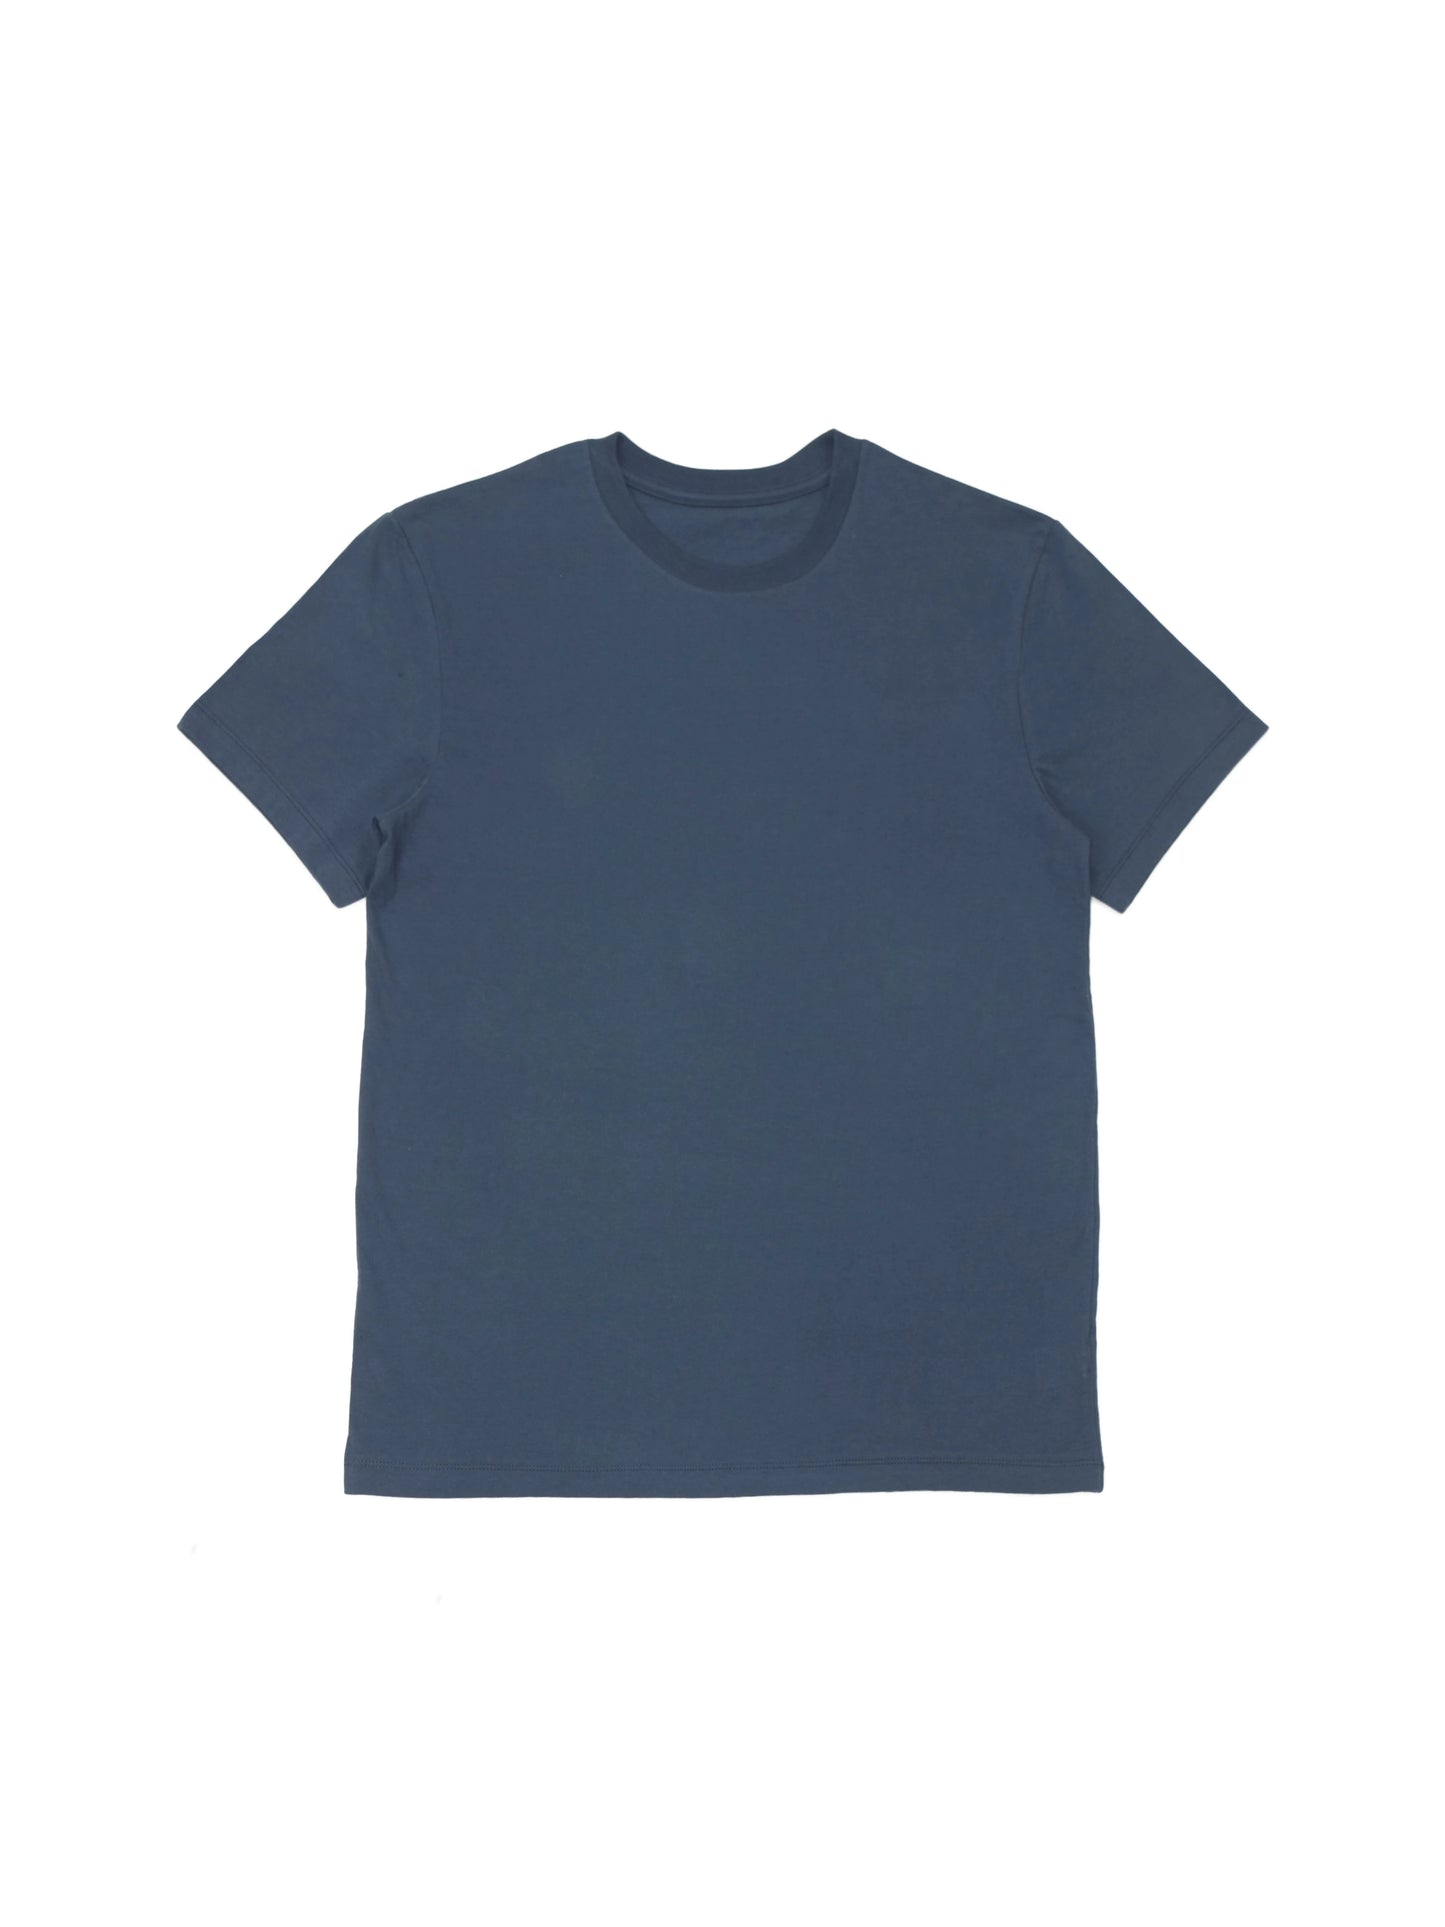 Sailor Blue T-Shirt in Trendy Boxy Fit.